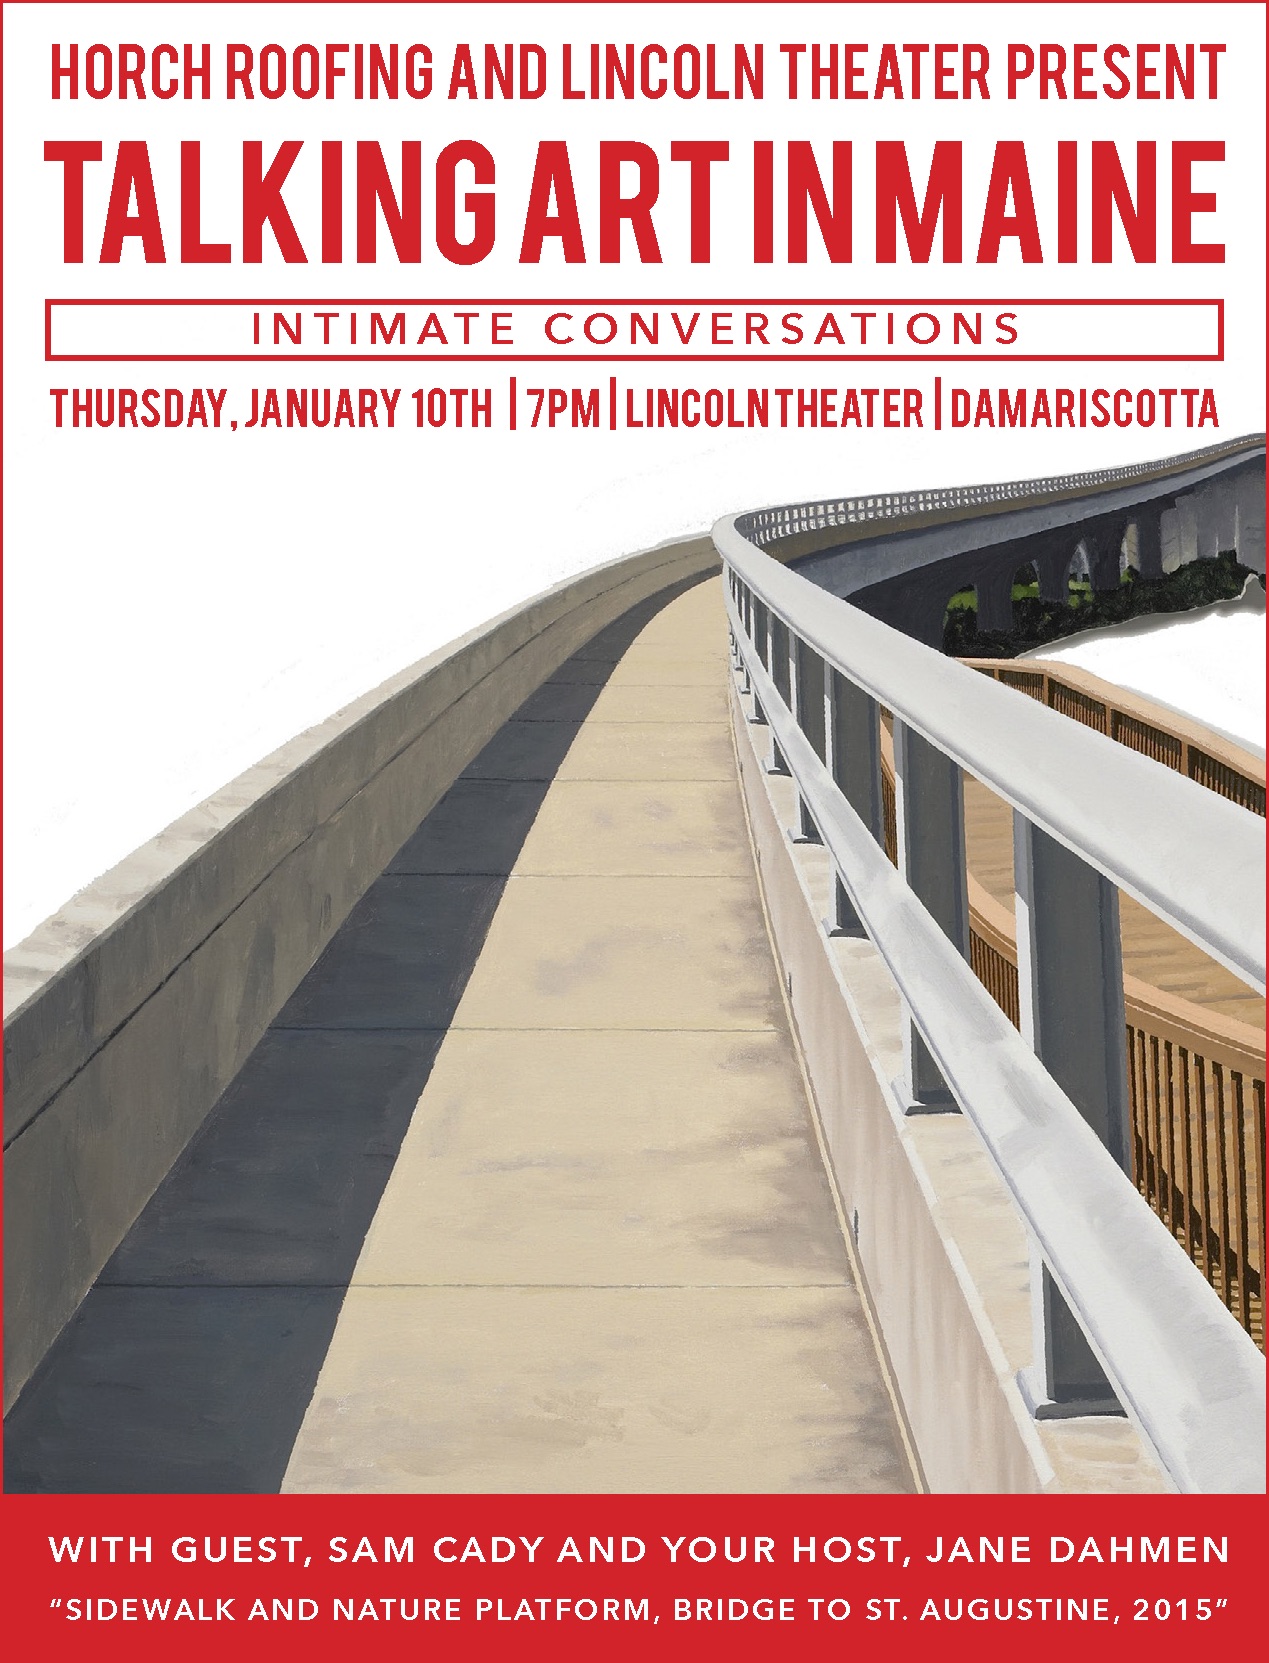 Talking Art in Maine with Jane Dahmen and guest Sam Cady.